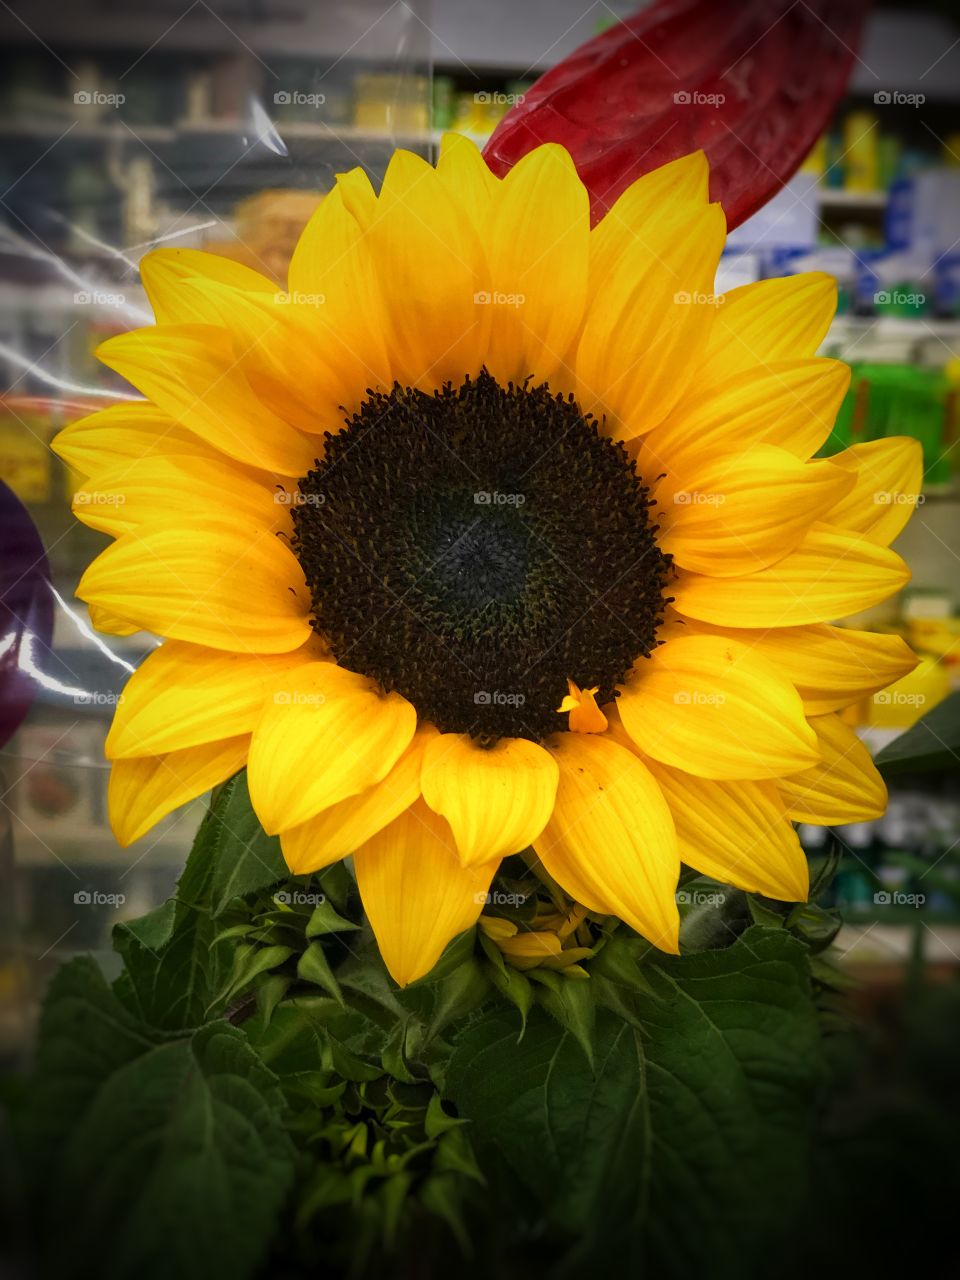 A beautiful sunflower... I have heard that some people thinks that this is a happy flower, as it looks like it is always smiling. I am not sure about that, but it is impressive and beautiful!